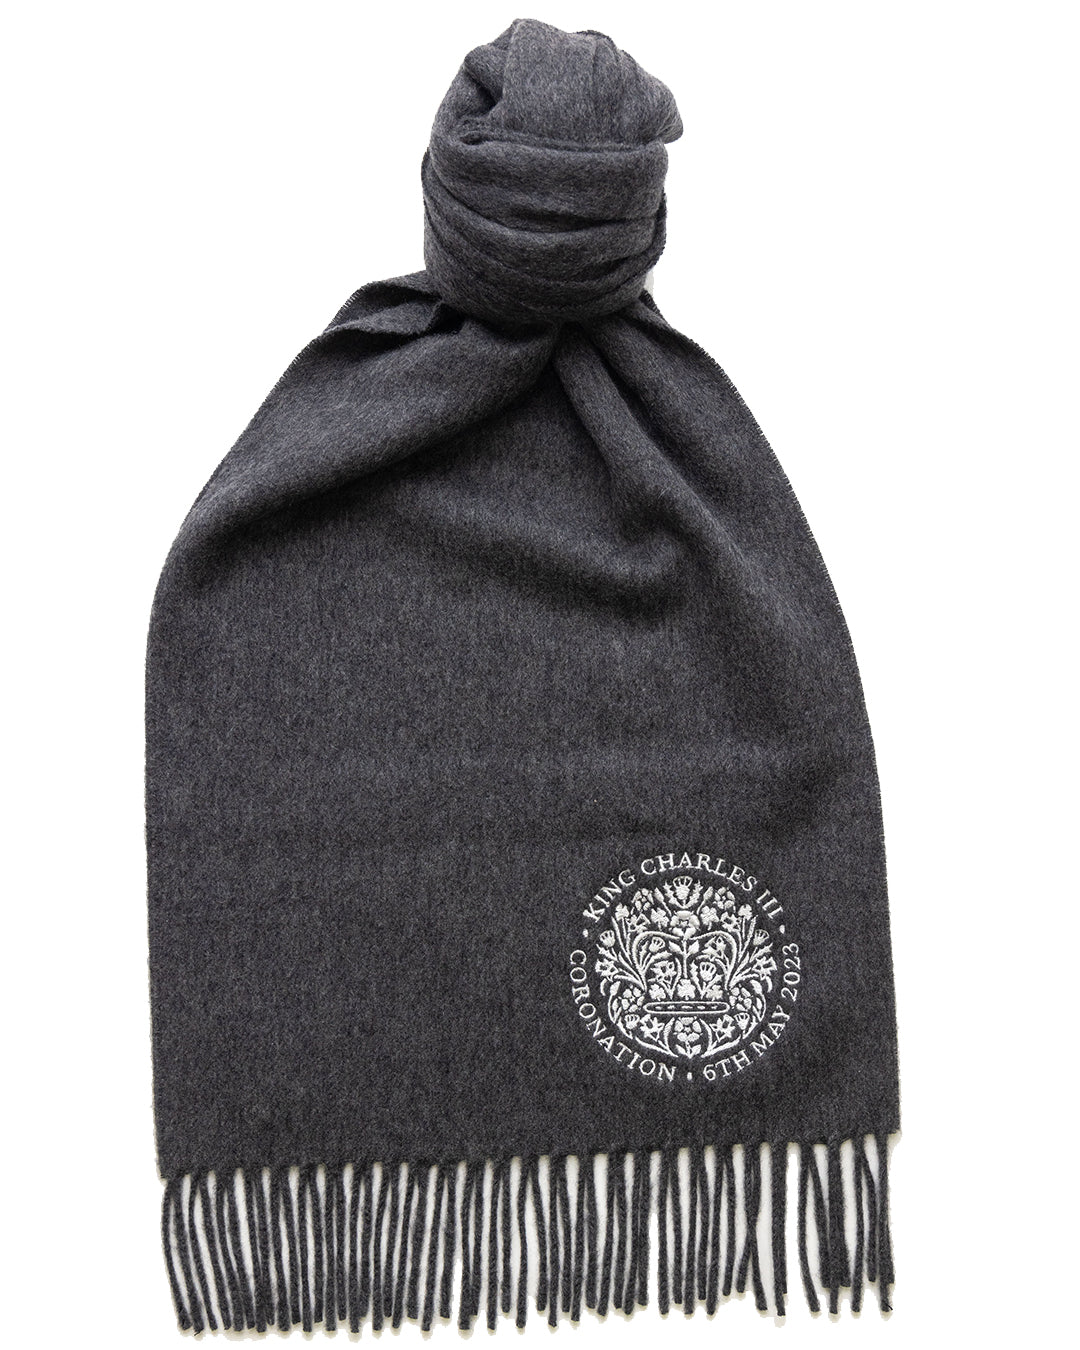 Limited Edition Coronation Cashmere Scarf